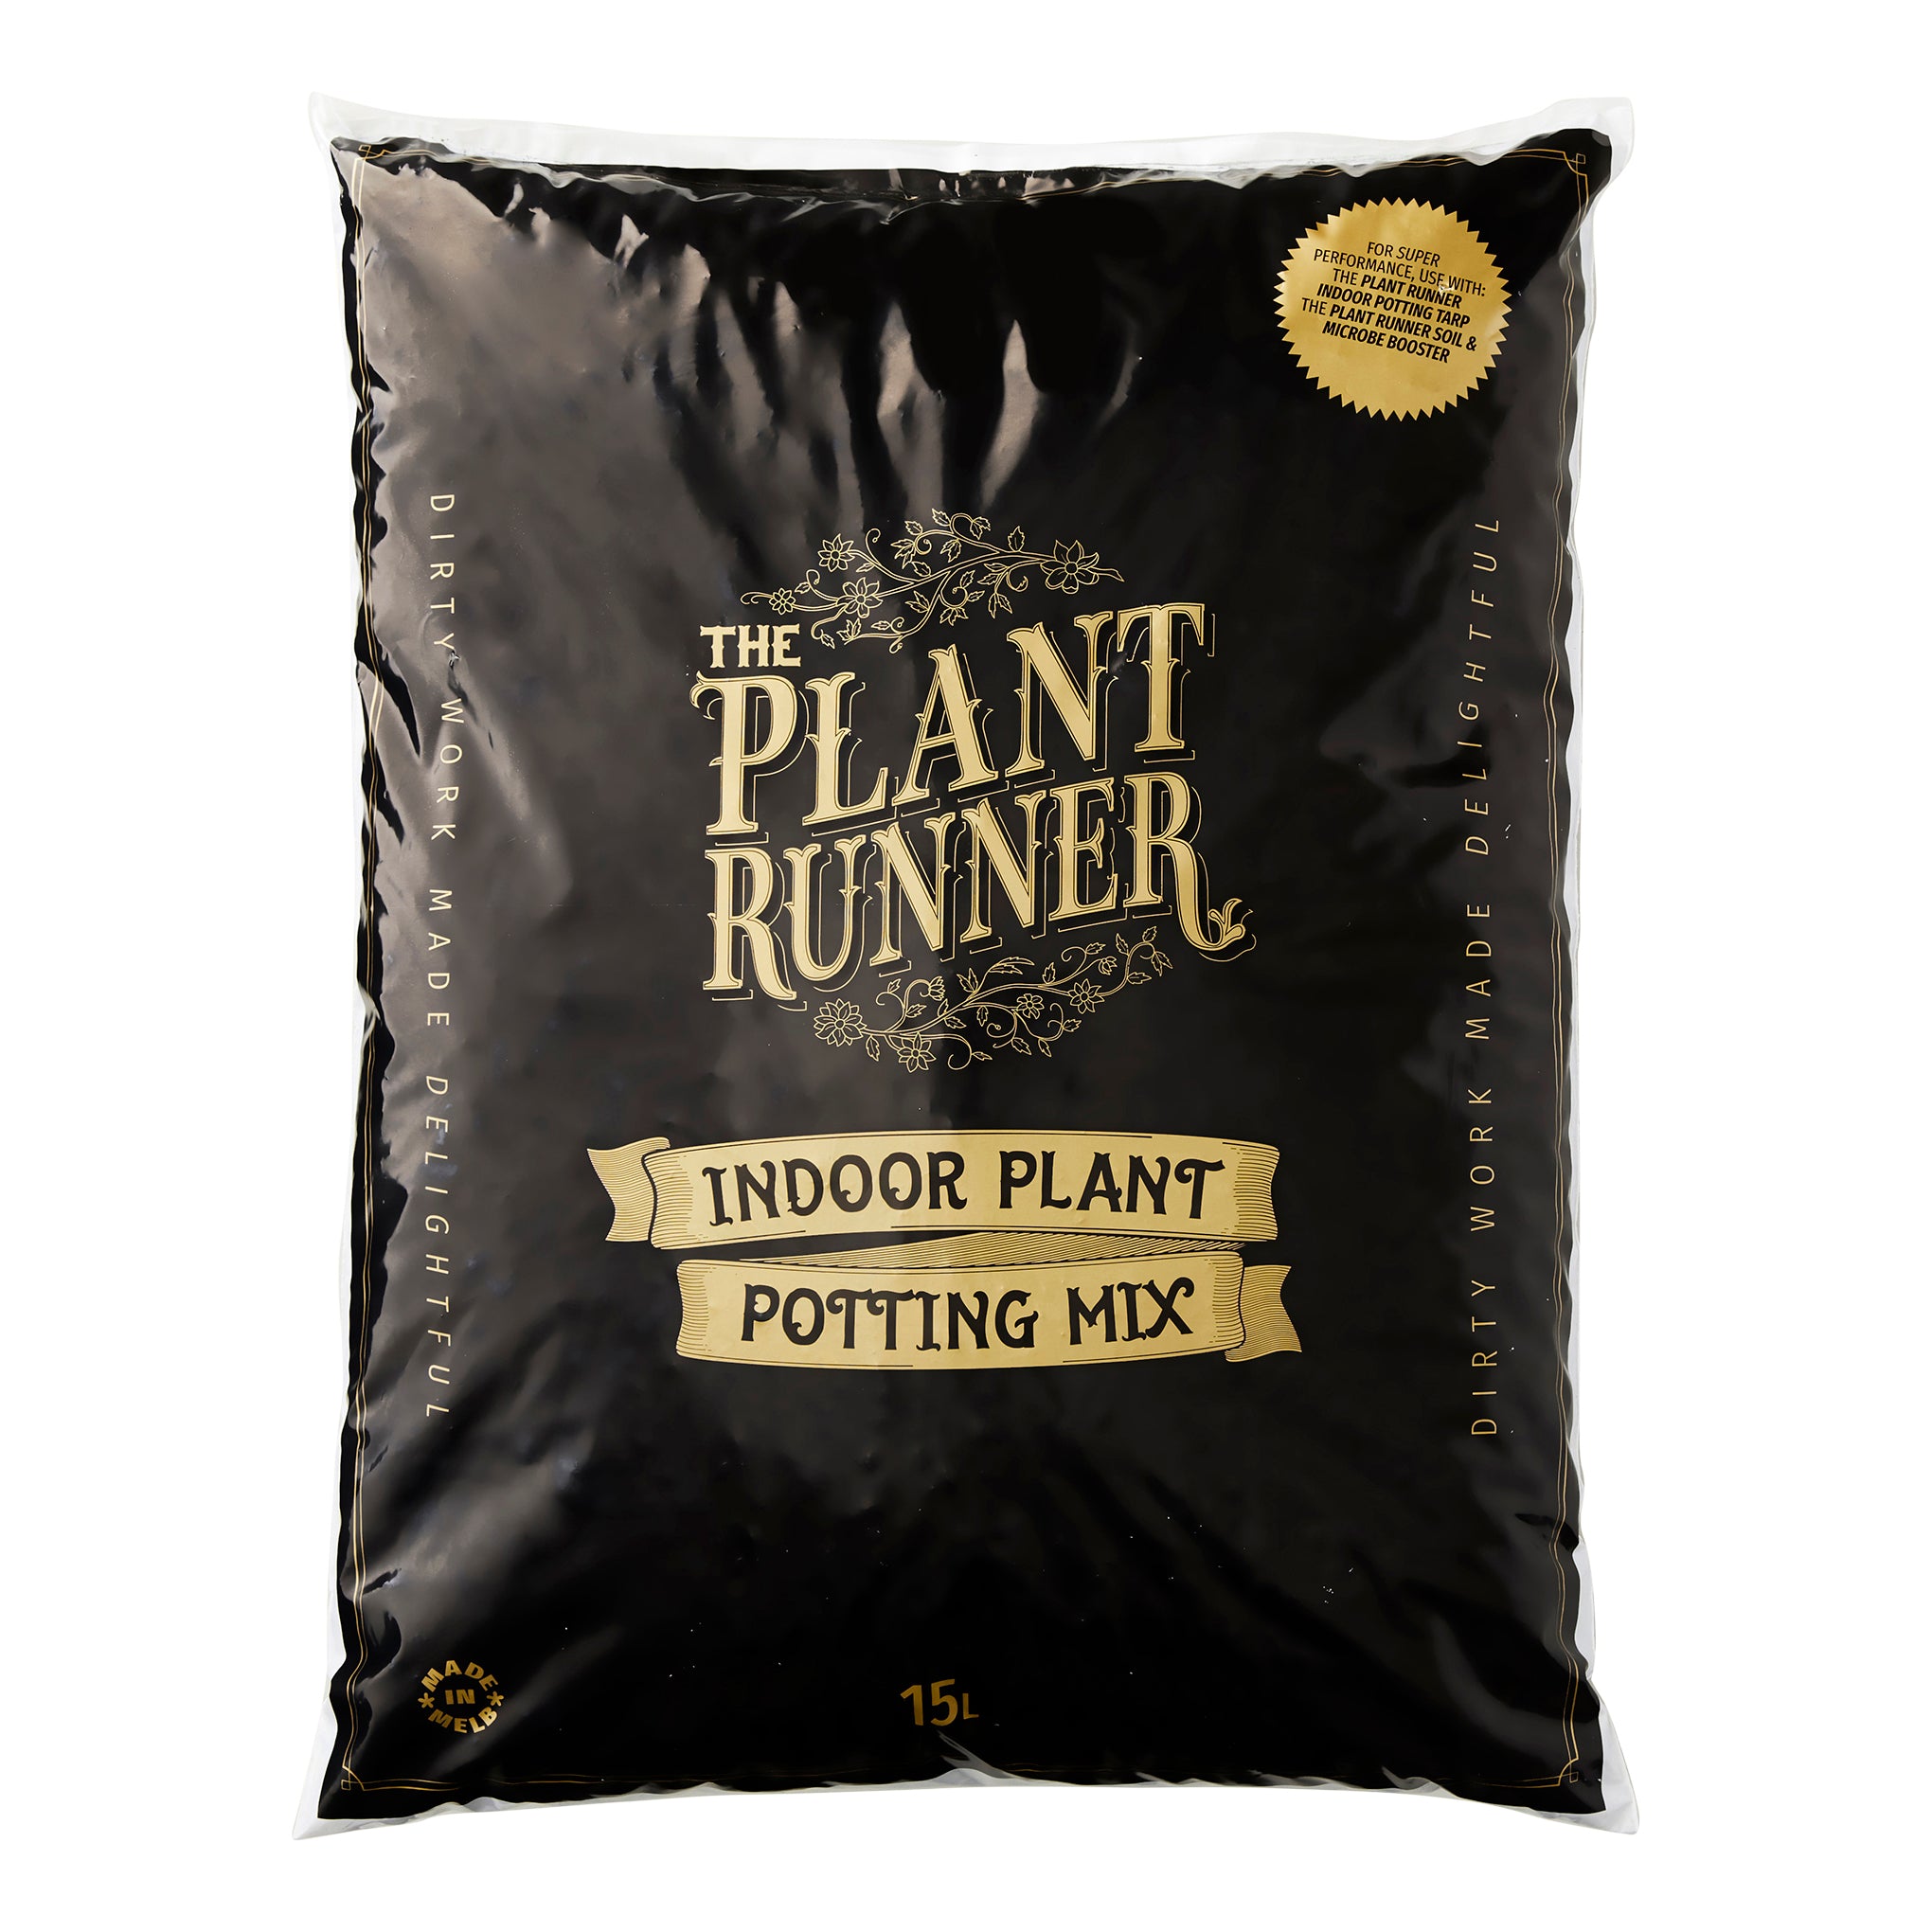 The Plant Runner Potting Mix